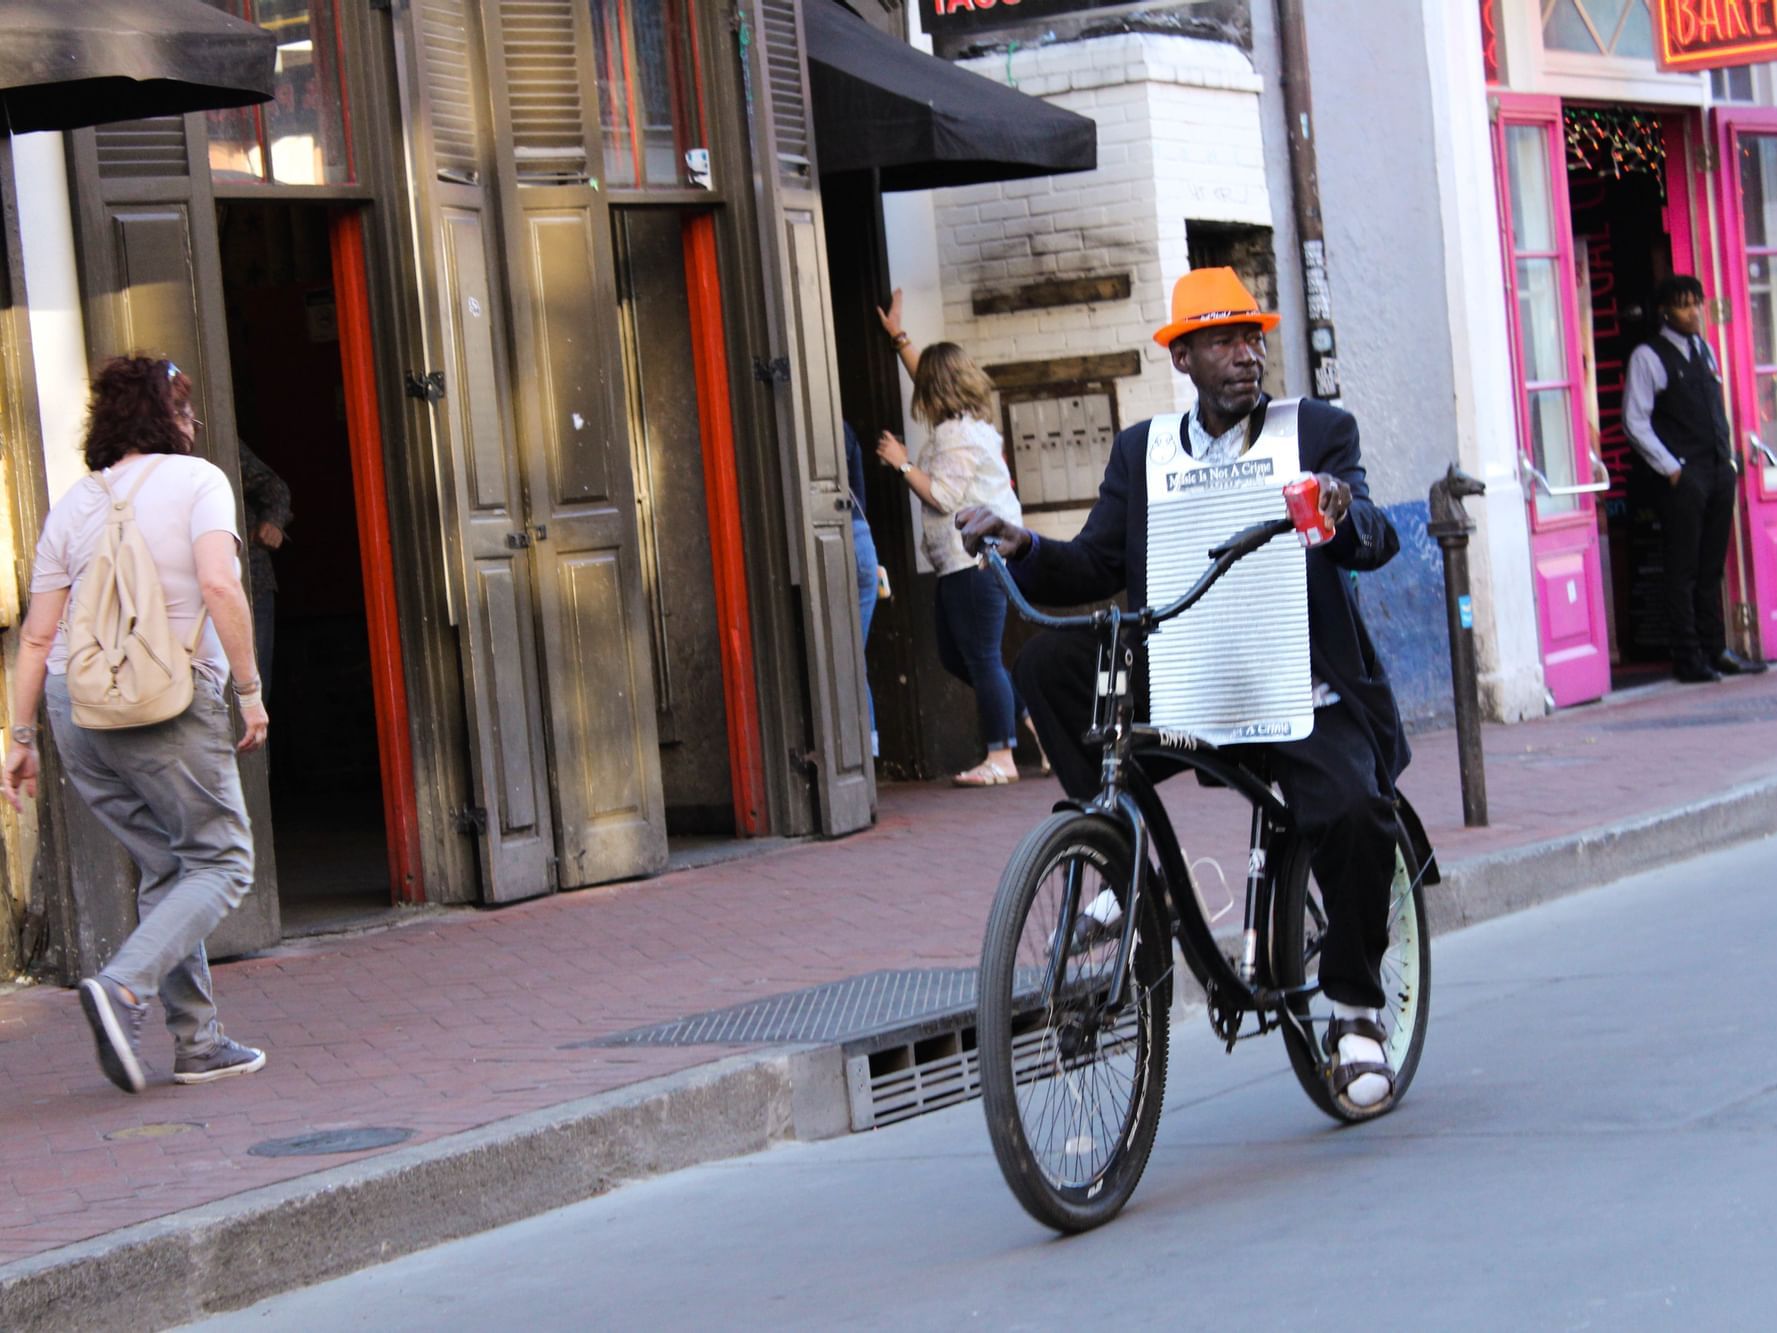 A man riding a bicycle in the streets near La Galerie Hotel